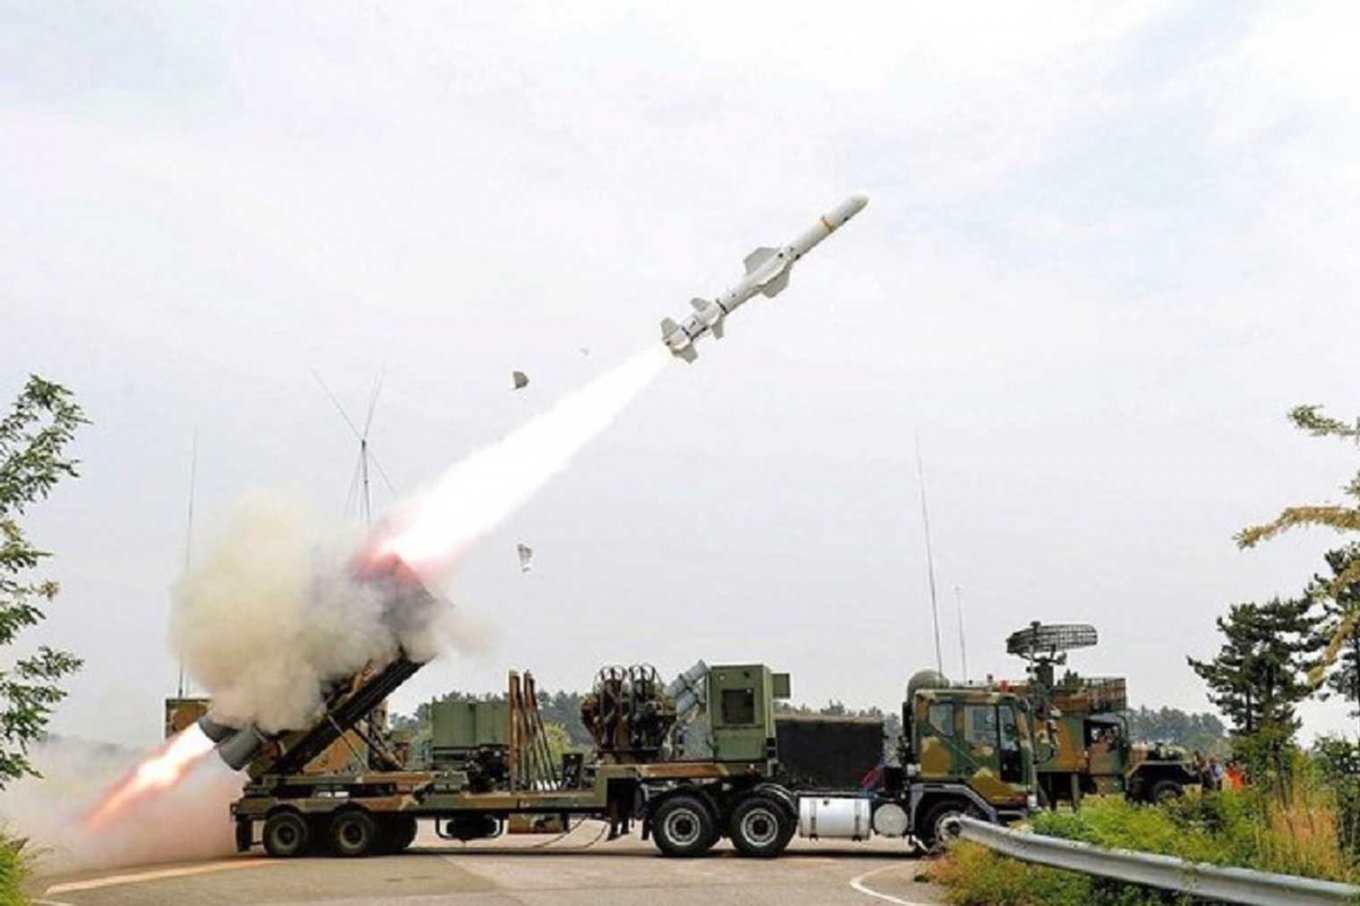 Land-based Harpoon missile launched from the truck